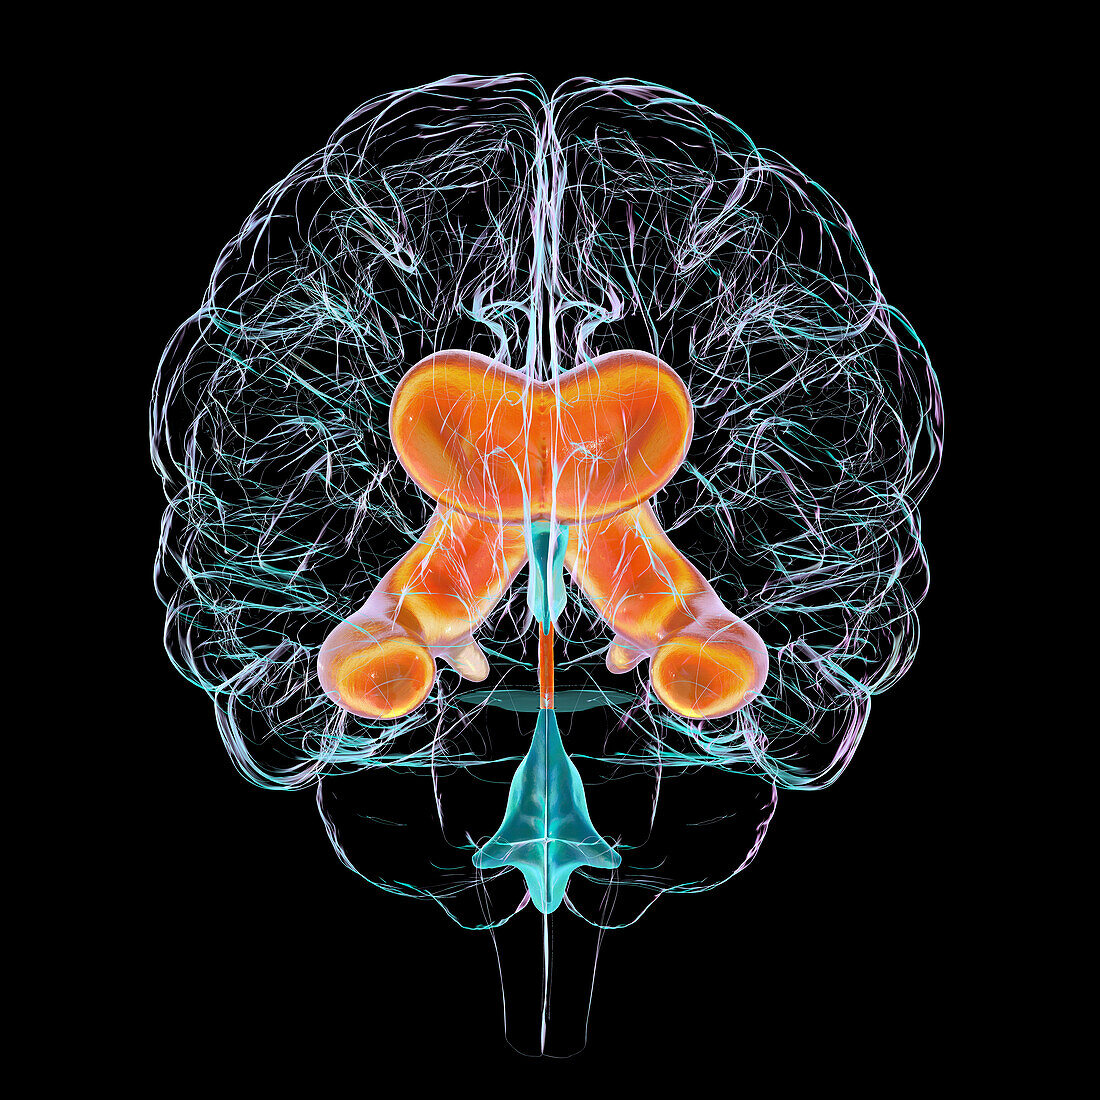 Enlarged lateral ventricles of the brain, illustration